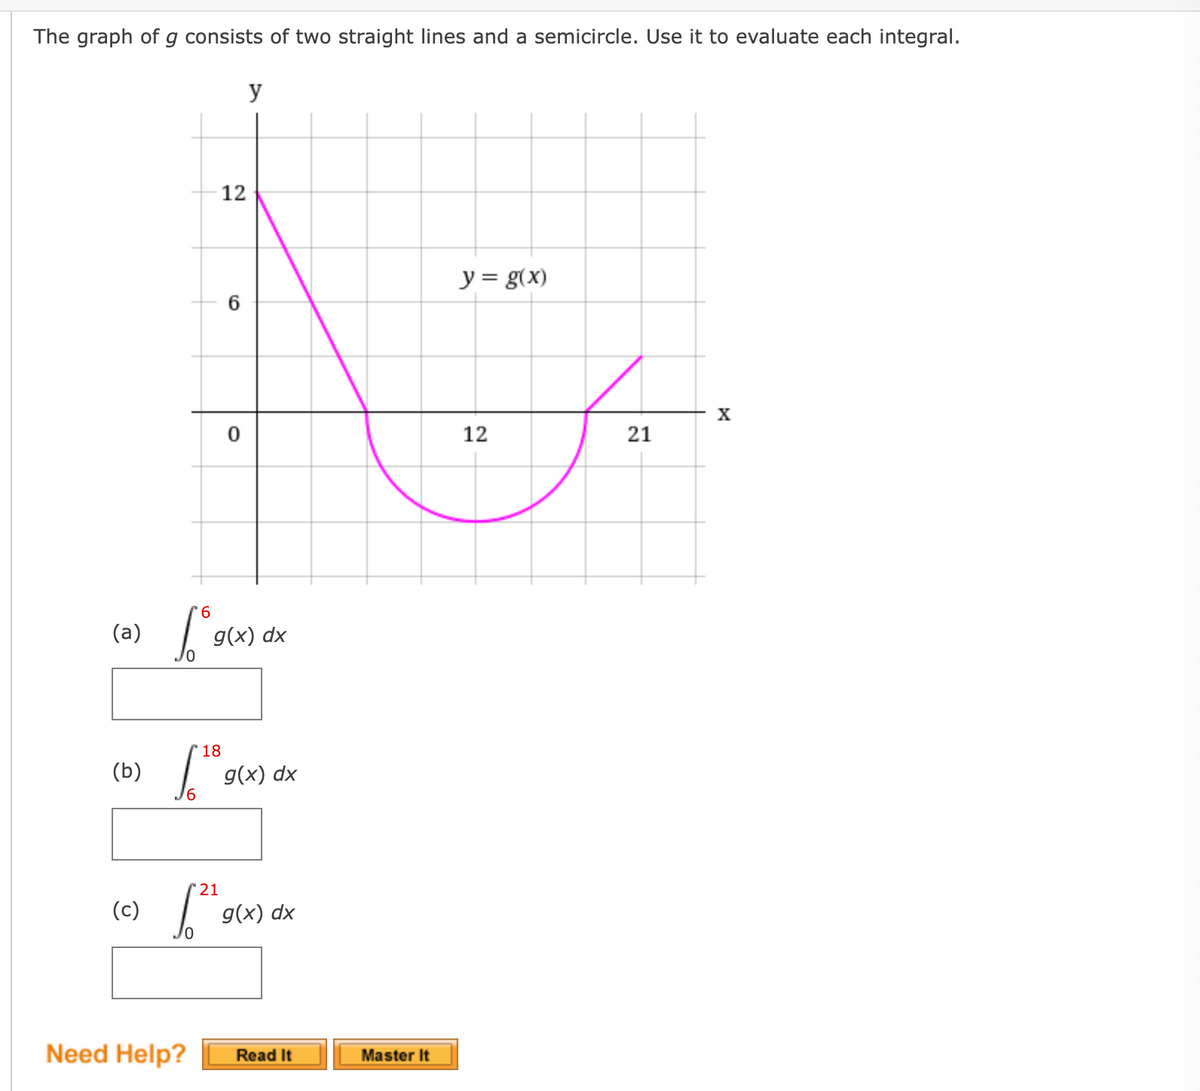 The graph of g consists of two straight lines and a semicircle. Use it to evaluate each integral.
y
12
y = g(x)
6.
X
12
9.
(a)
д(x) dx
18
(b)
g(x) dx
'21
(c)
g(x) dx
Need Help?
Read It
Master It
21
